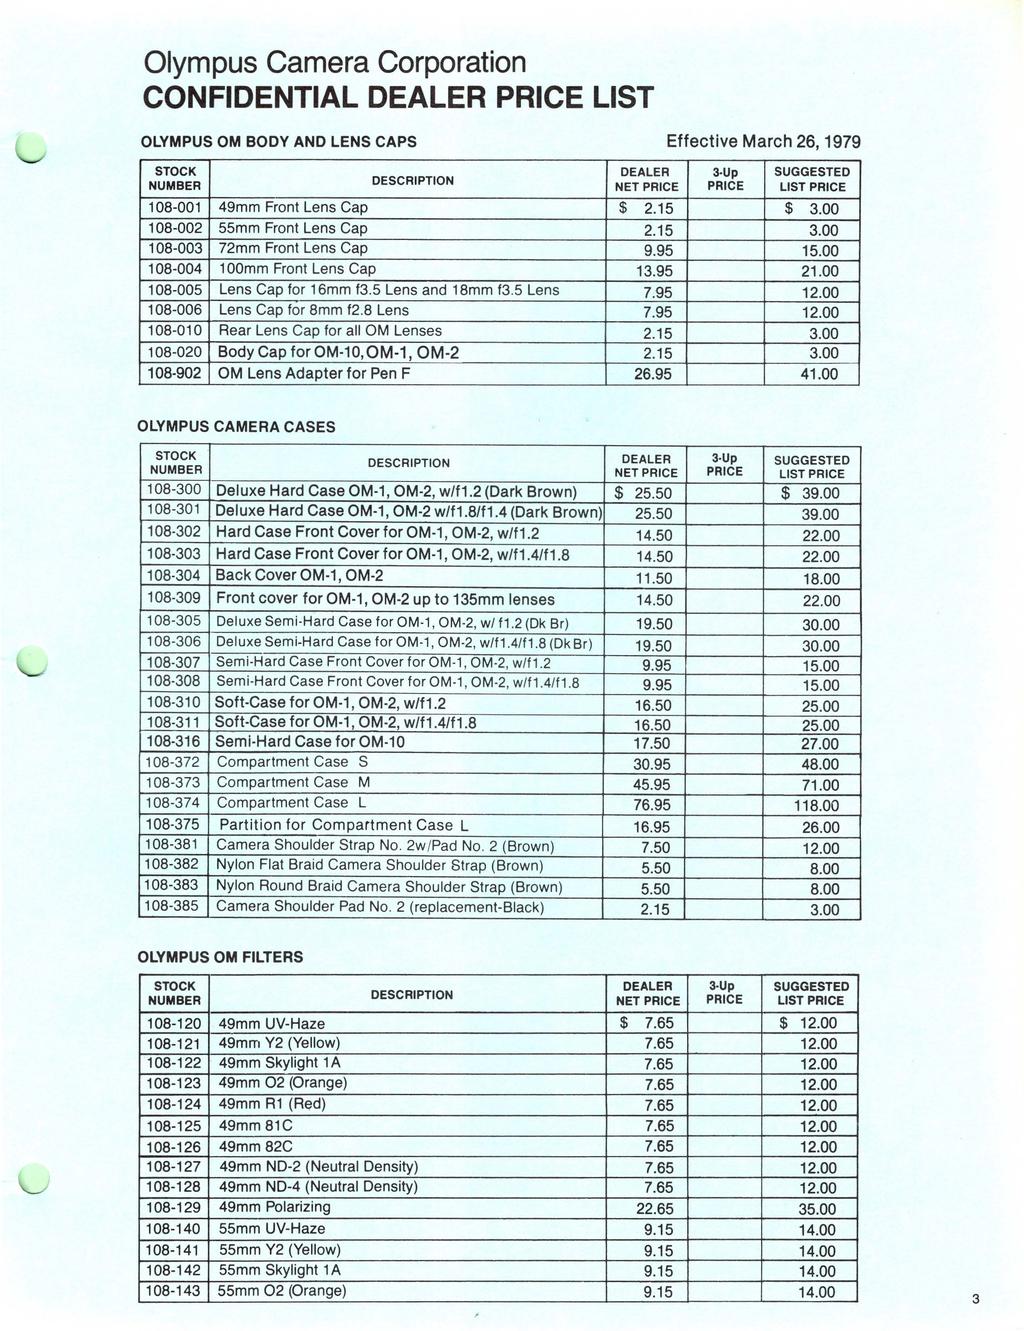 CONFIDENTIAL DEALER PRICE LIST OLYMPUS OM BODY AND LENS CAPS Effective March 26,1979 DEALER 3 Up NET PRICE PRICE 108-001 49mm Front Lens Cap $ 2.15 $ 3.00 108-002 55mm Front Lens Cap 2.15 3.